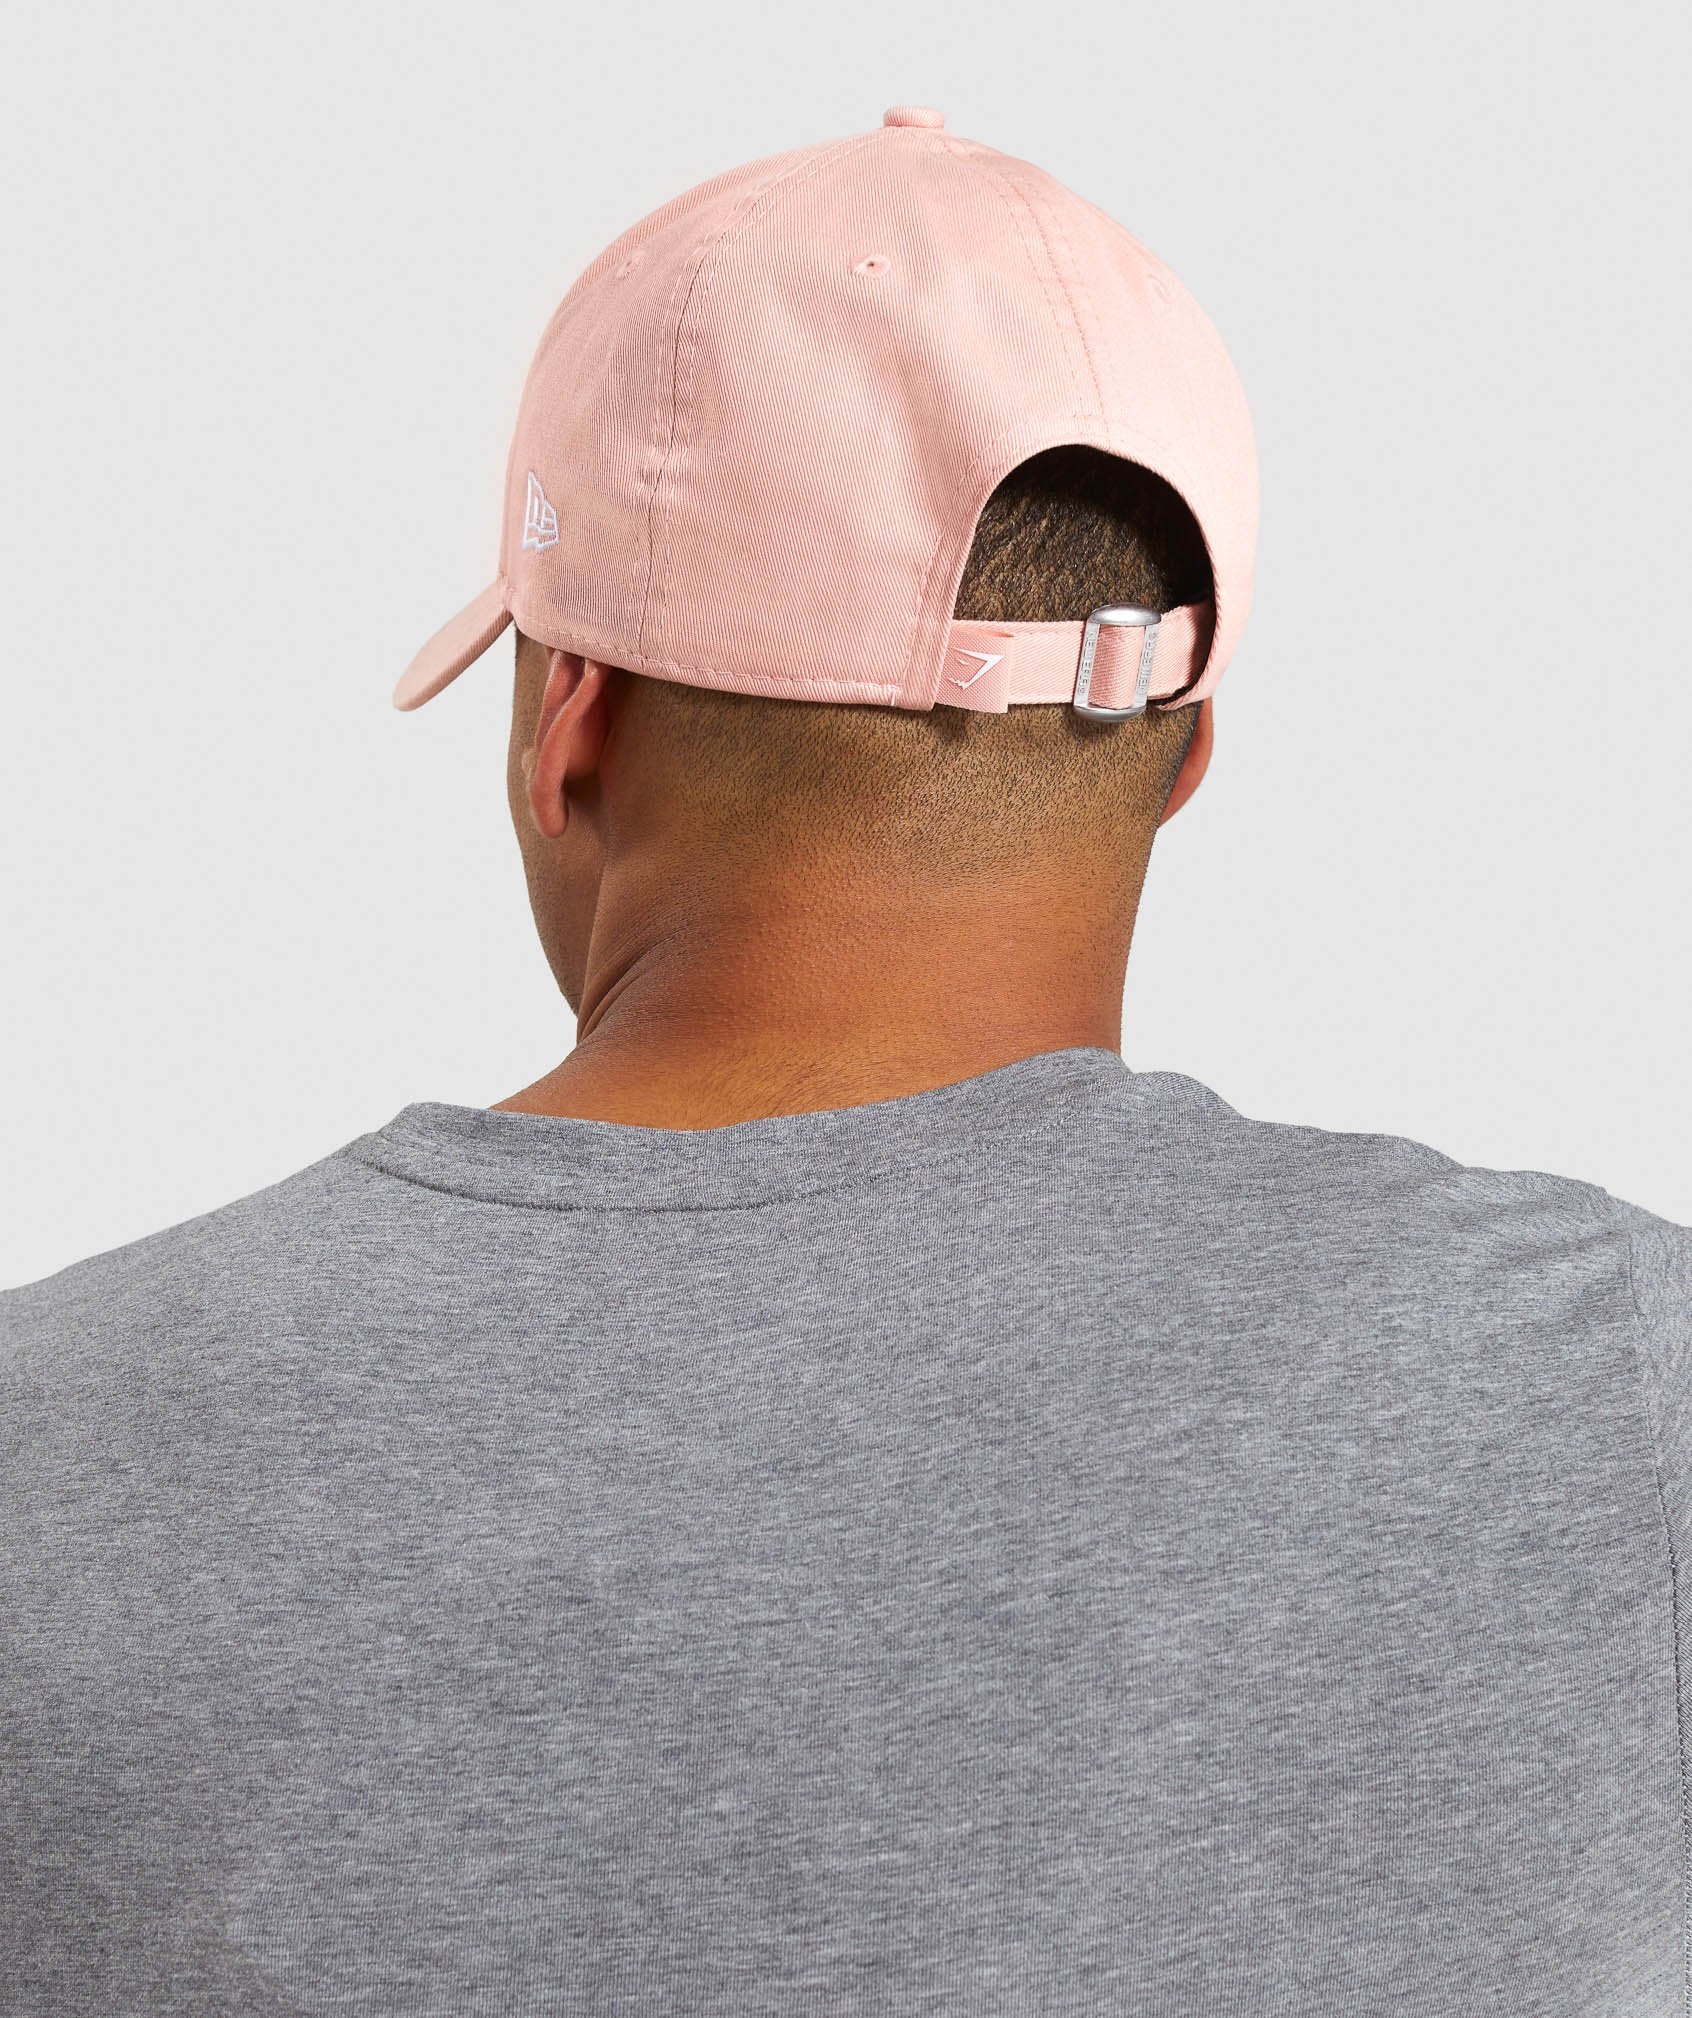 New Era 9FORTY Adjustable in Pink - view 5